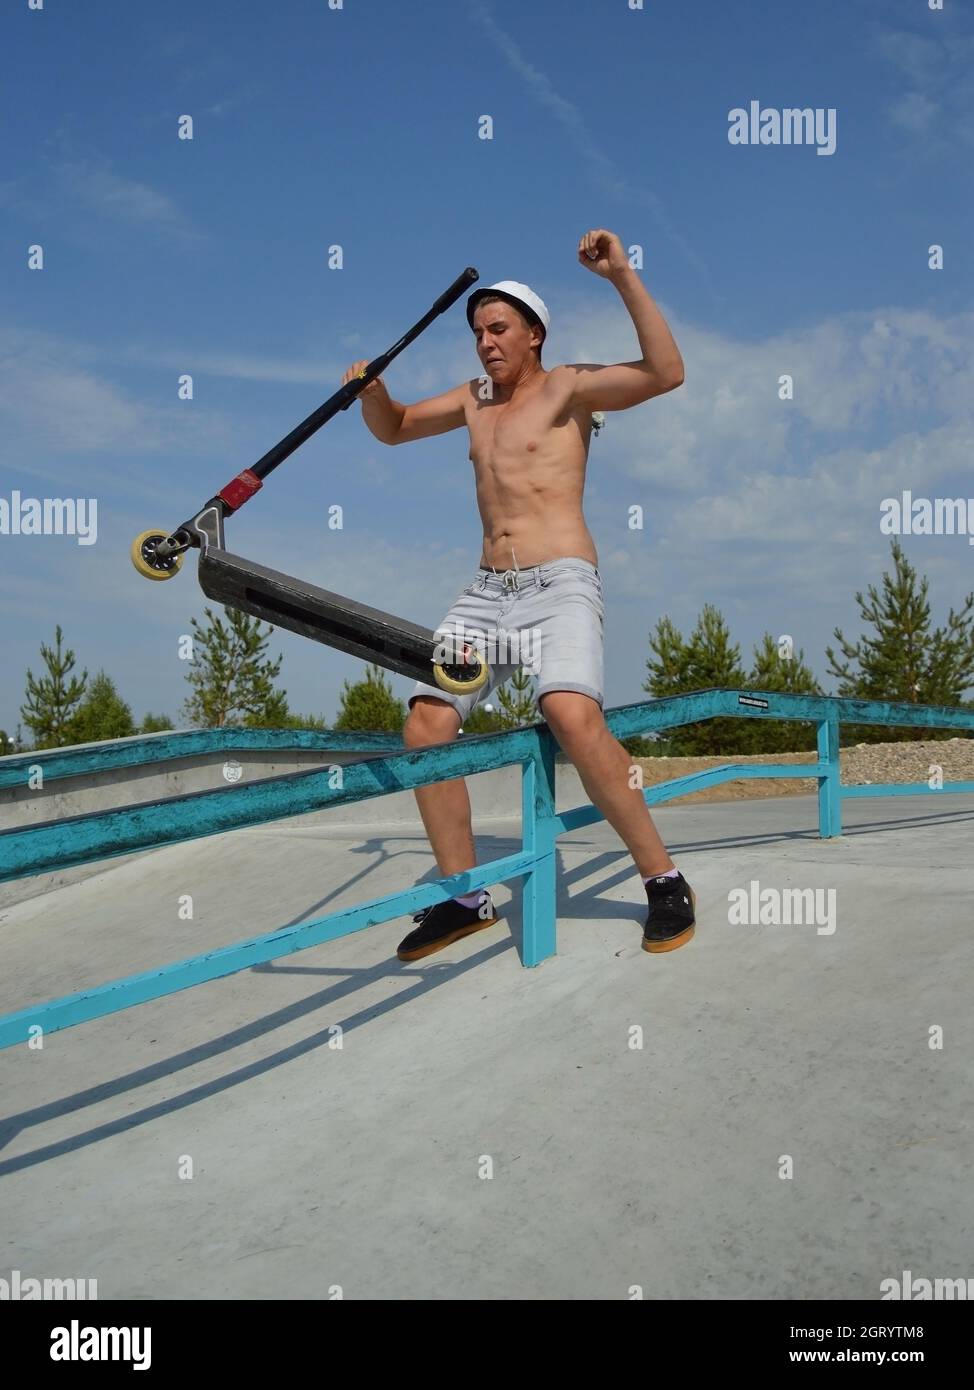 Dobrograd, Vladimir region, Russia. 29 July 2017. Teen on scooter failed performs a trick in the skatepark Stock Photo